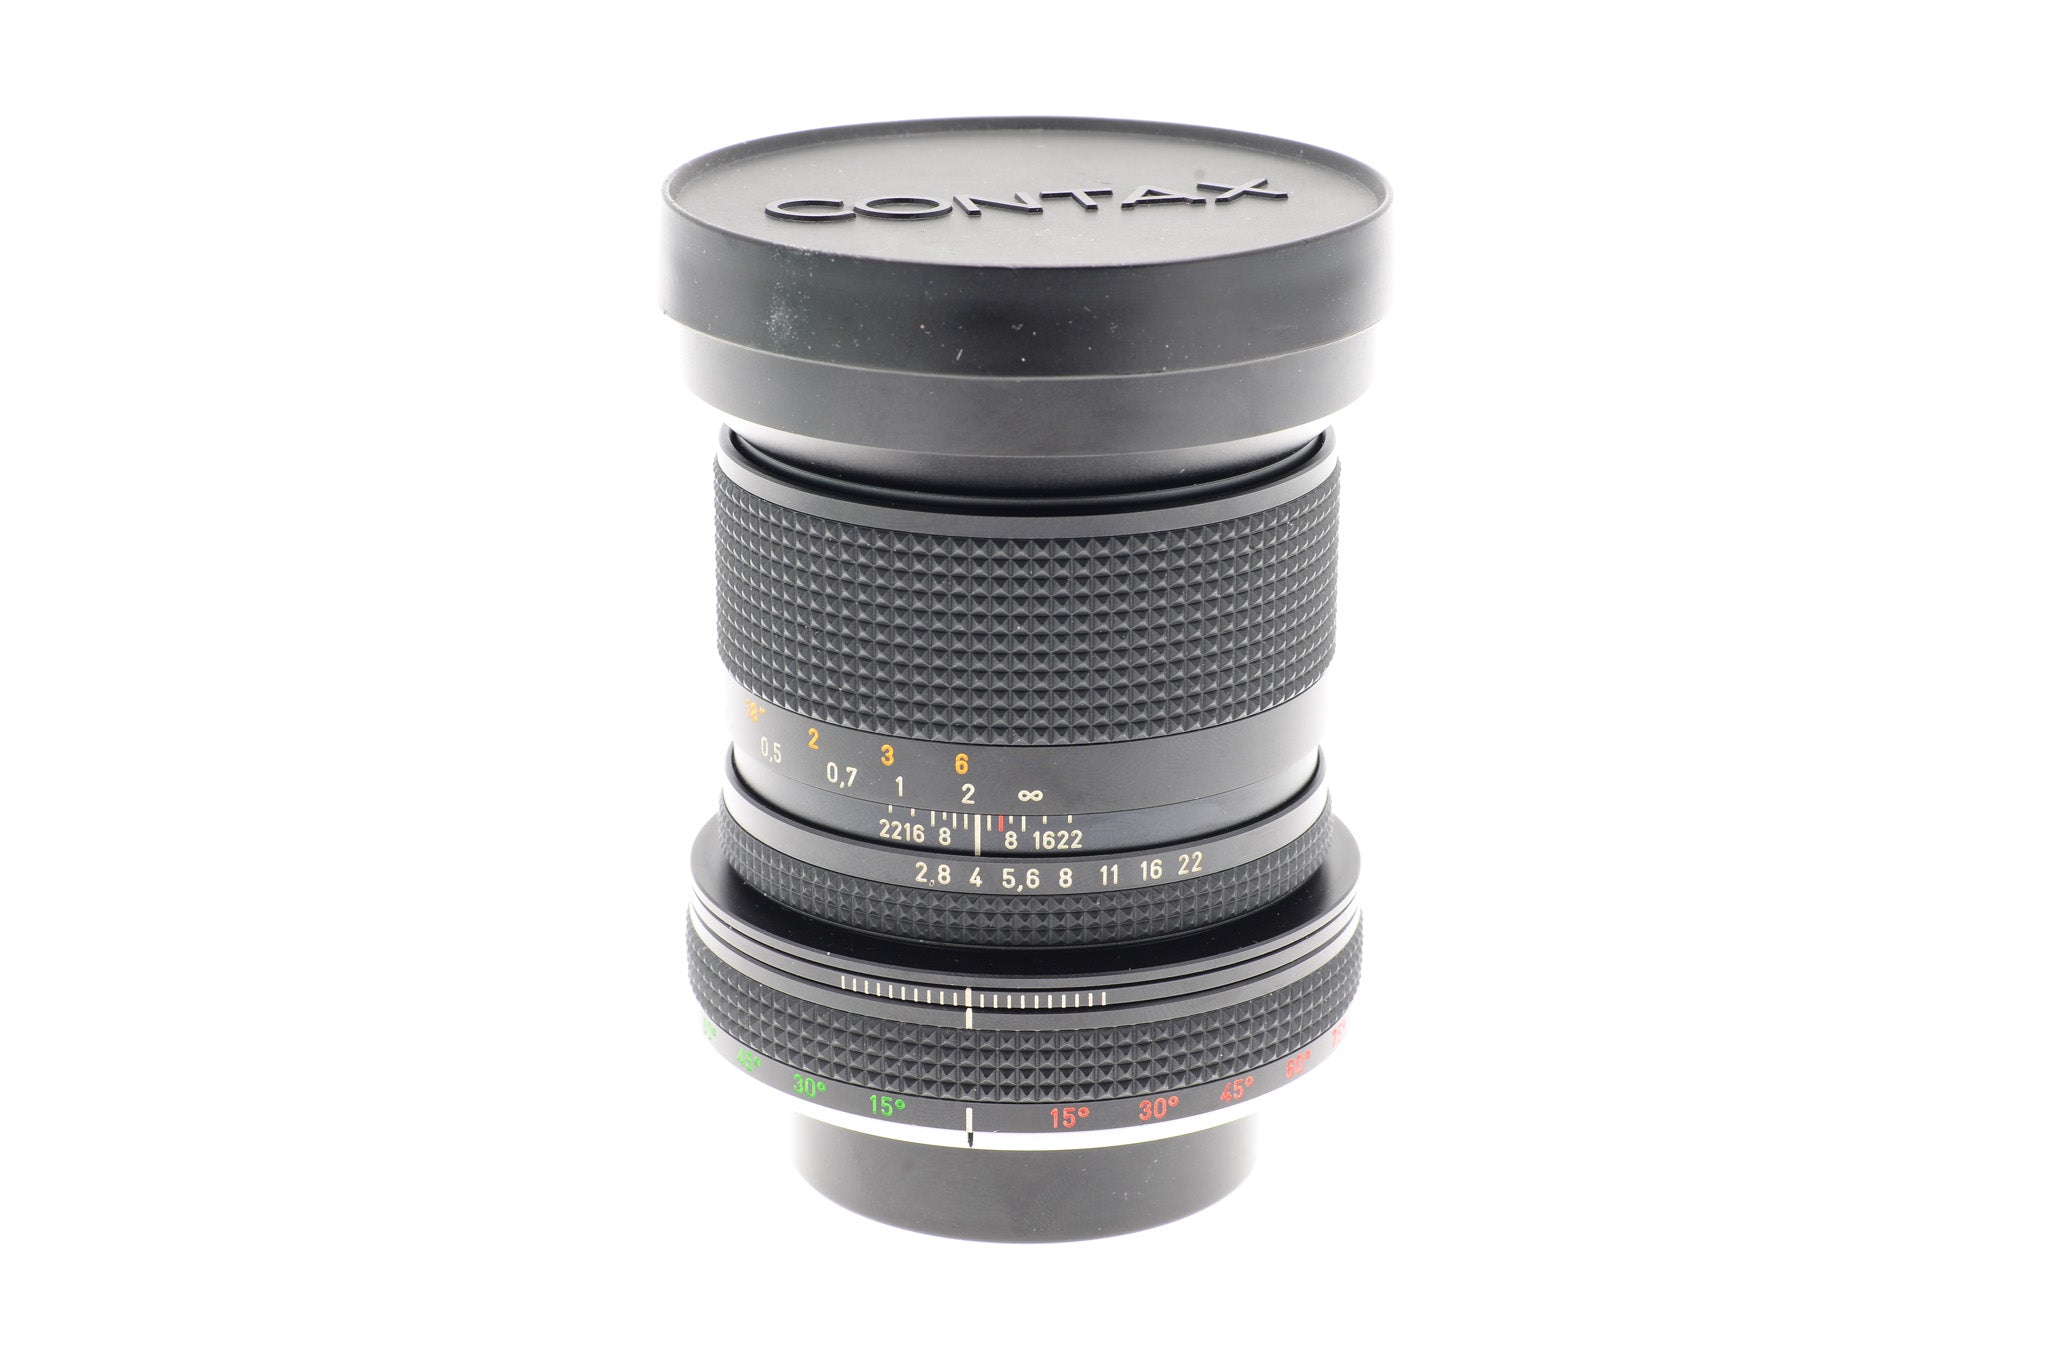 Carl Zeiss 35mm f2.8 PC Distagon T* - Lens